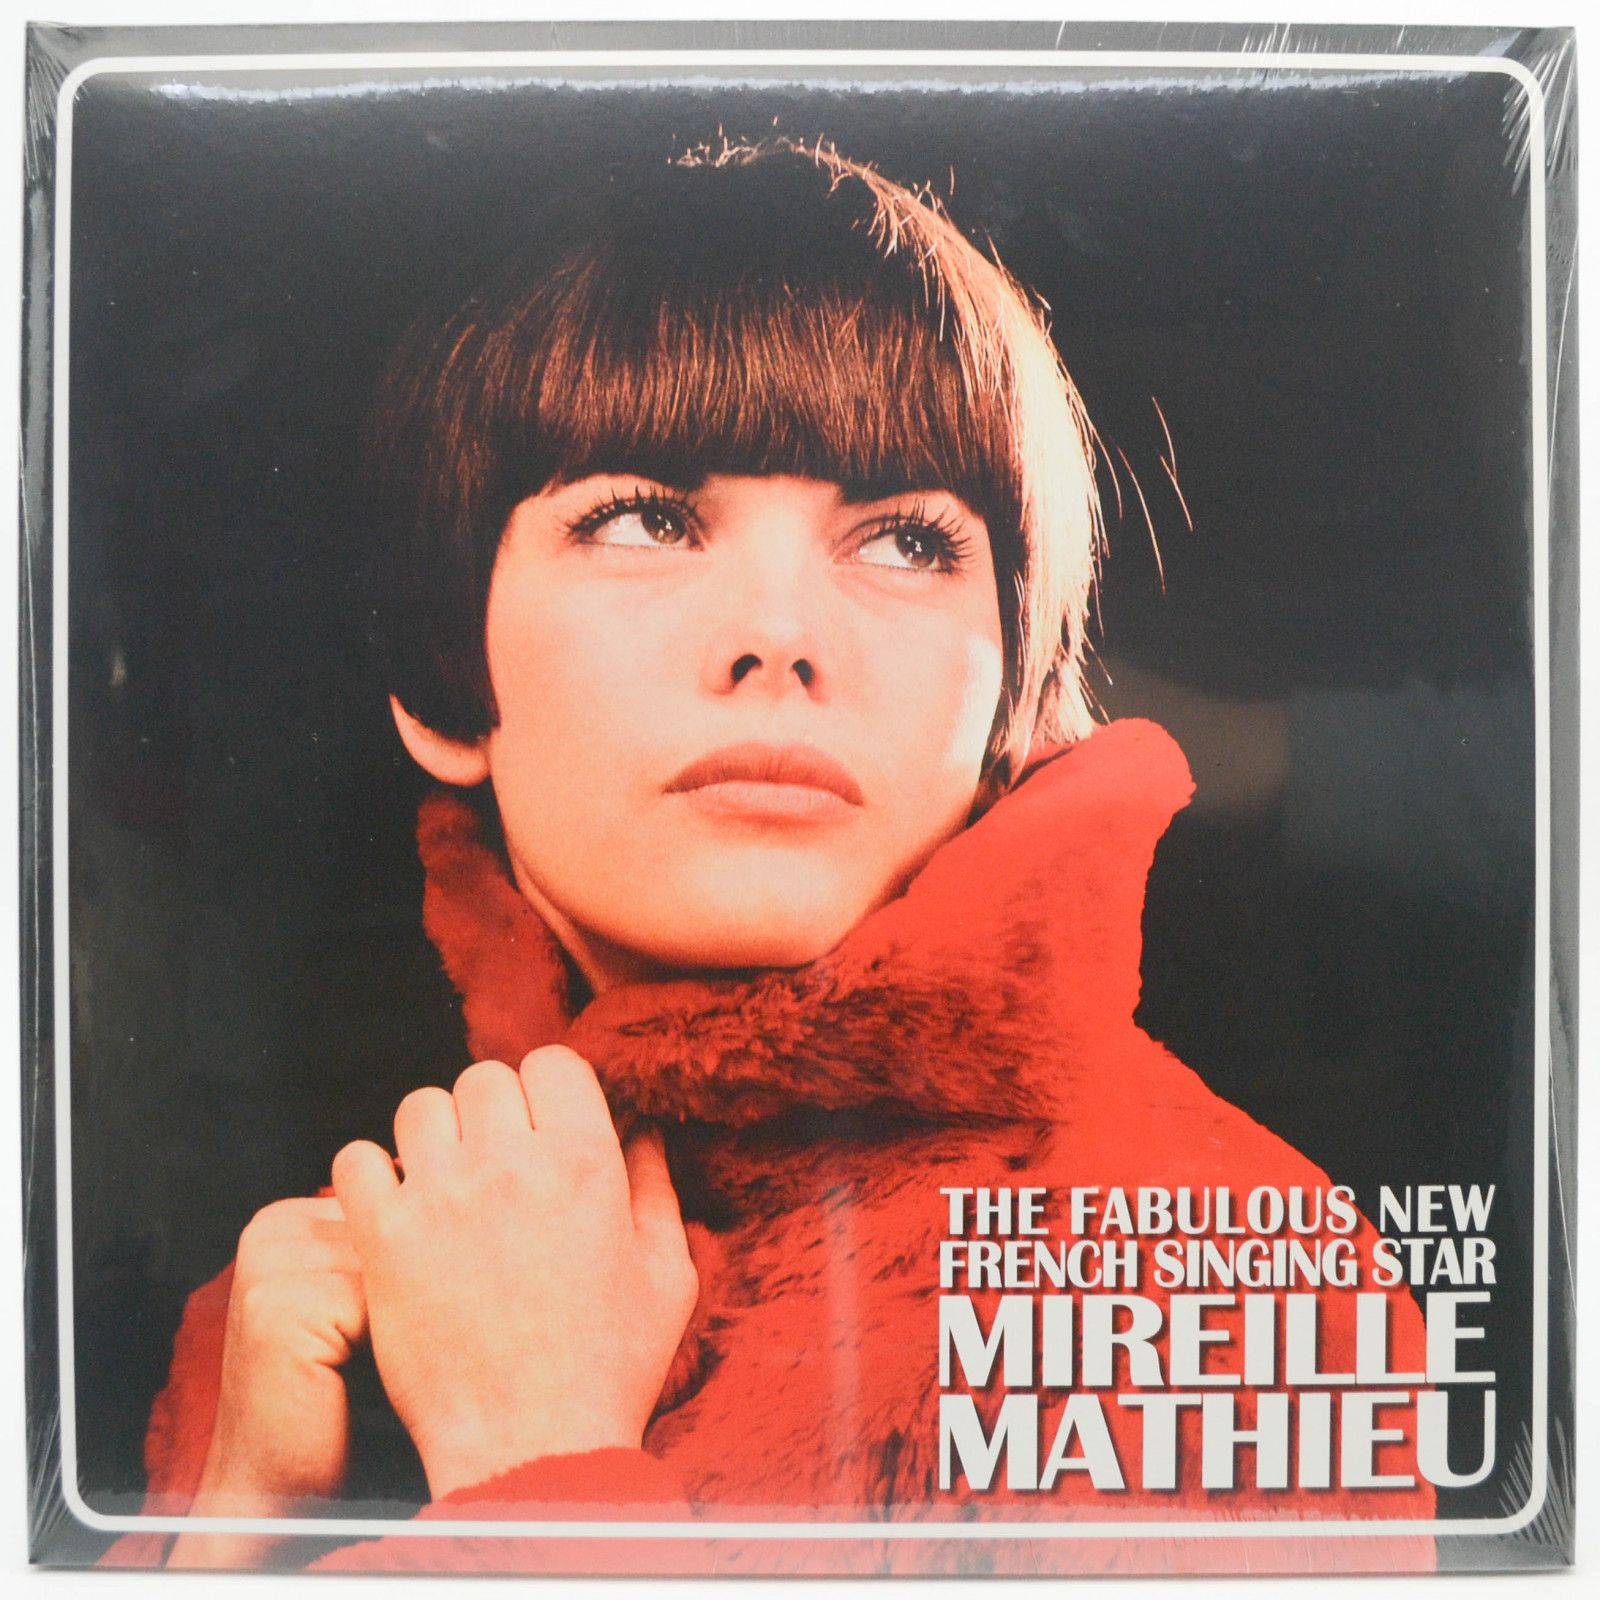 Mireille Mathieu — The Fabulous New French Singing Star (2LP, France), 1966